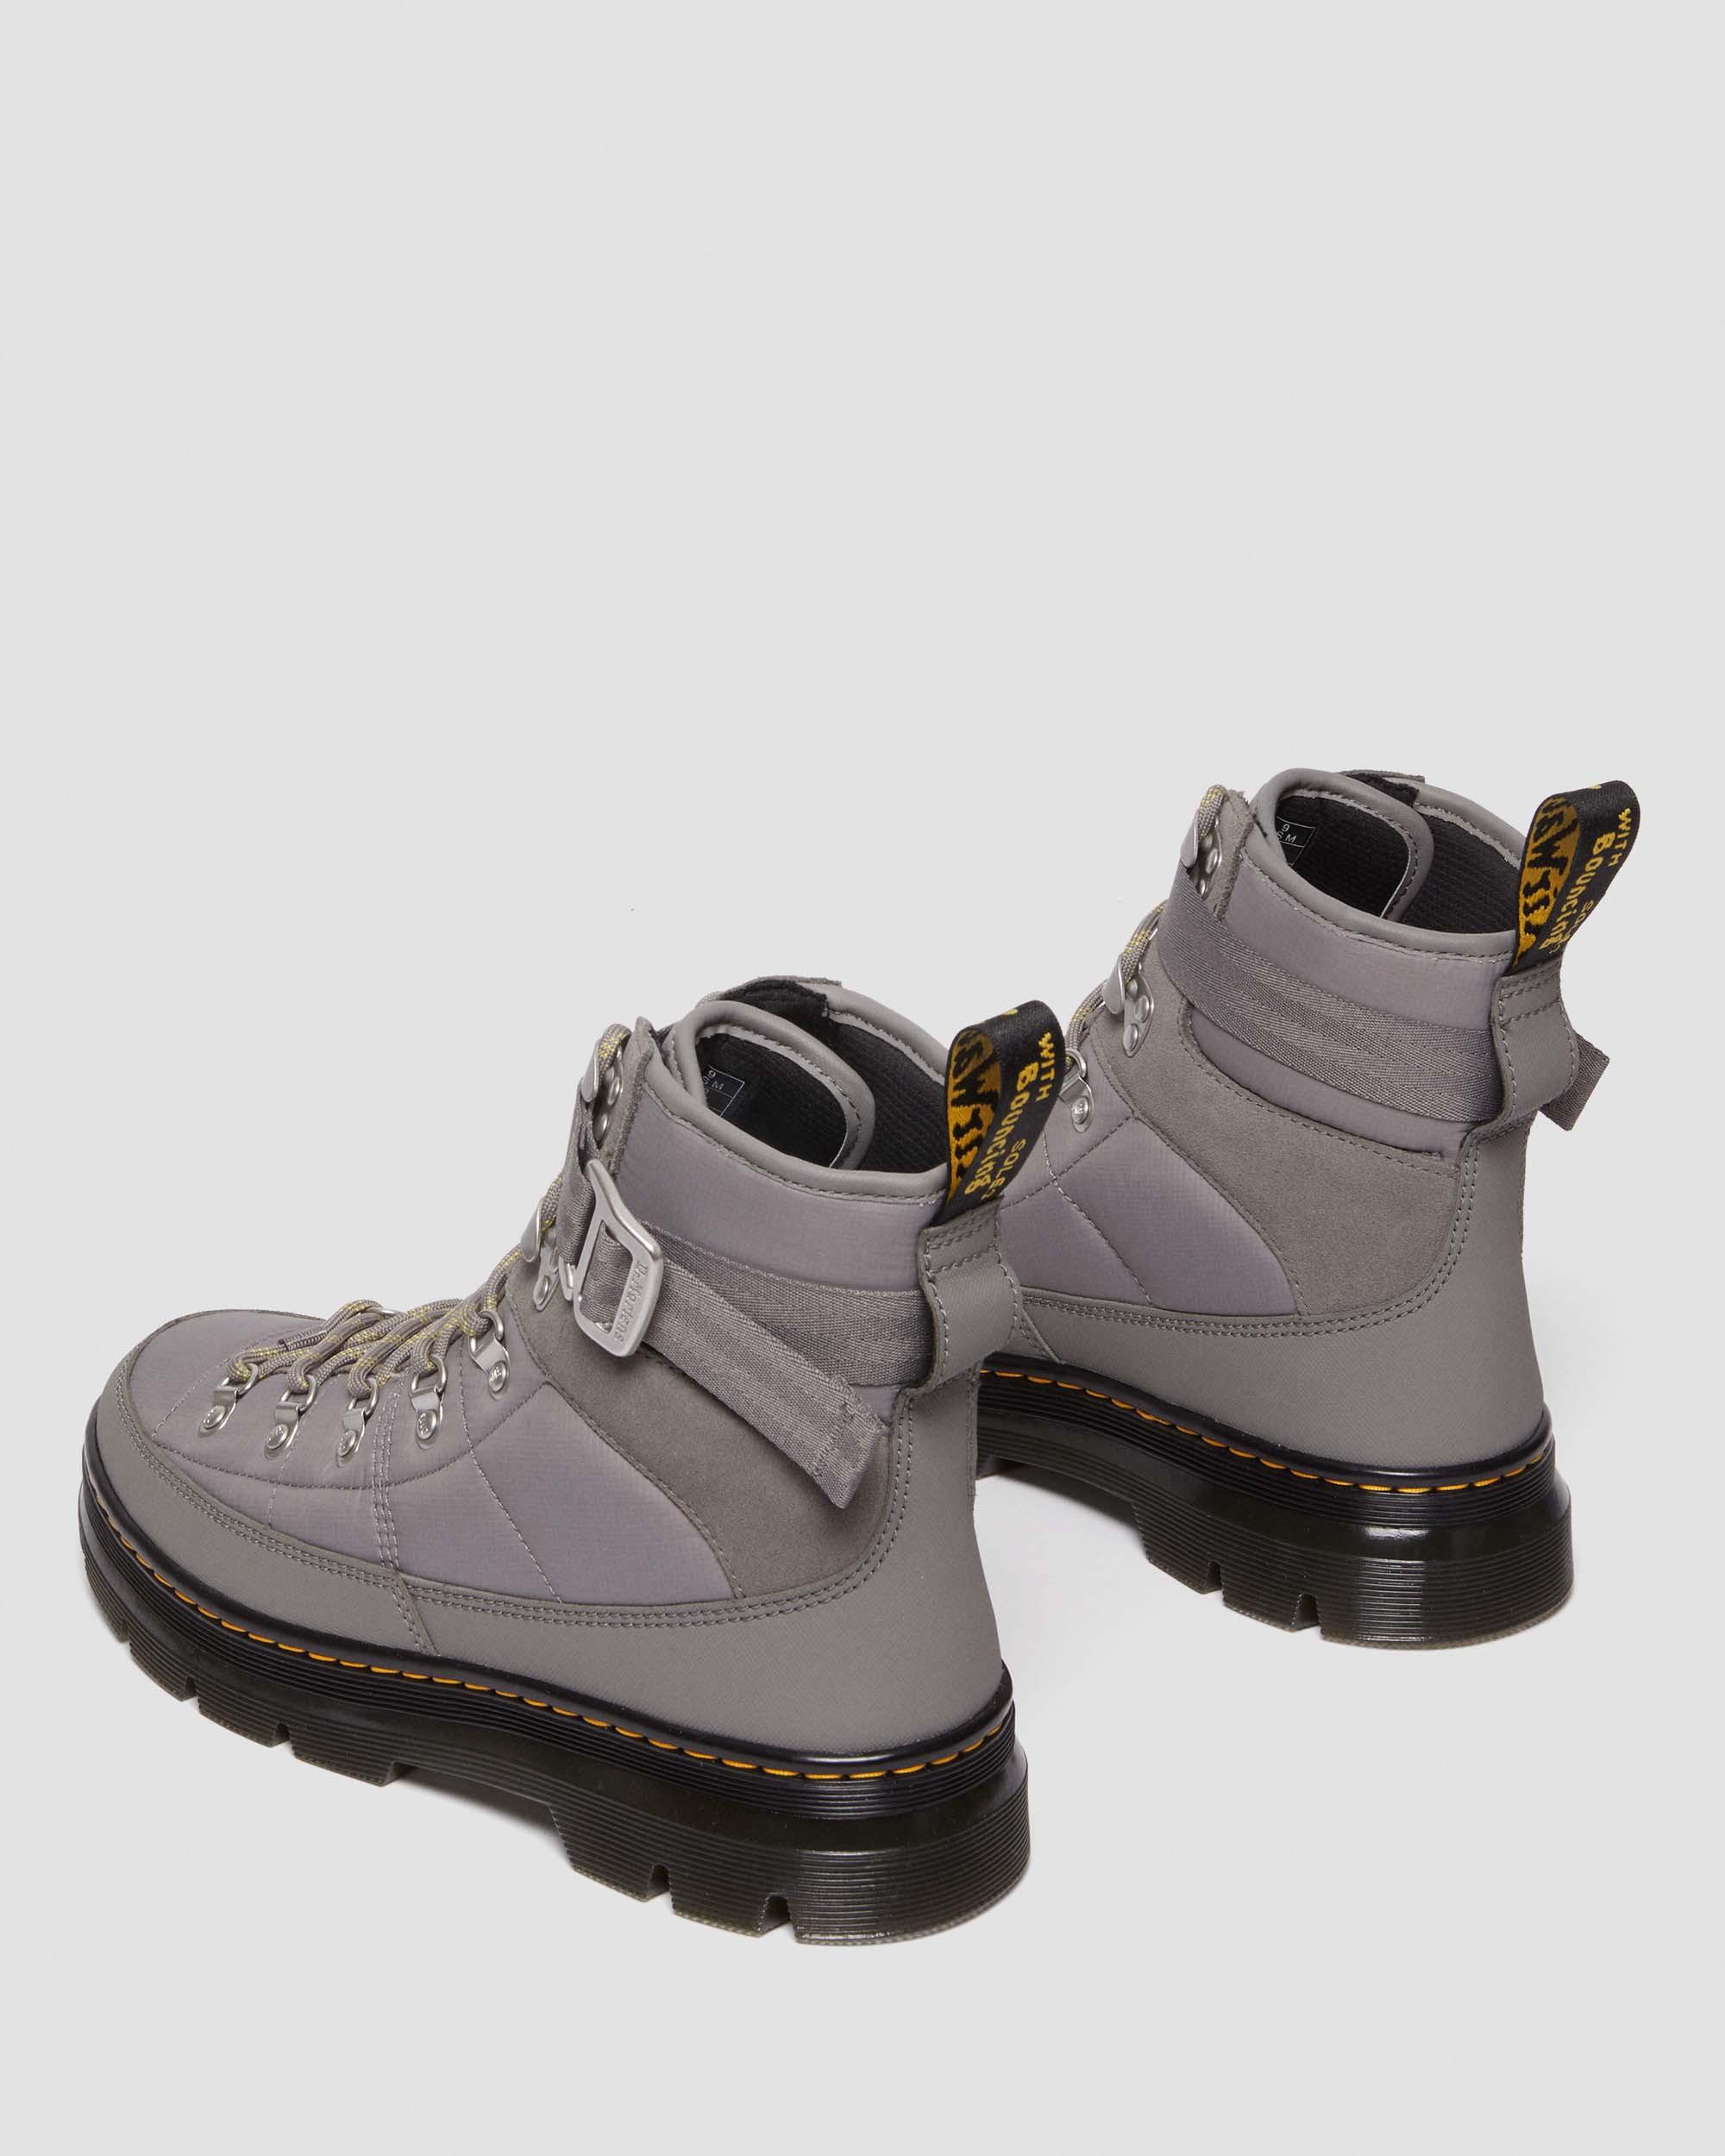 Combs Tech Quilted Casual Boots in Nickel Grey | Dr. Martens